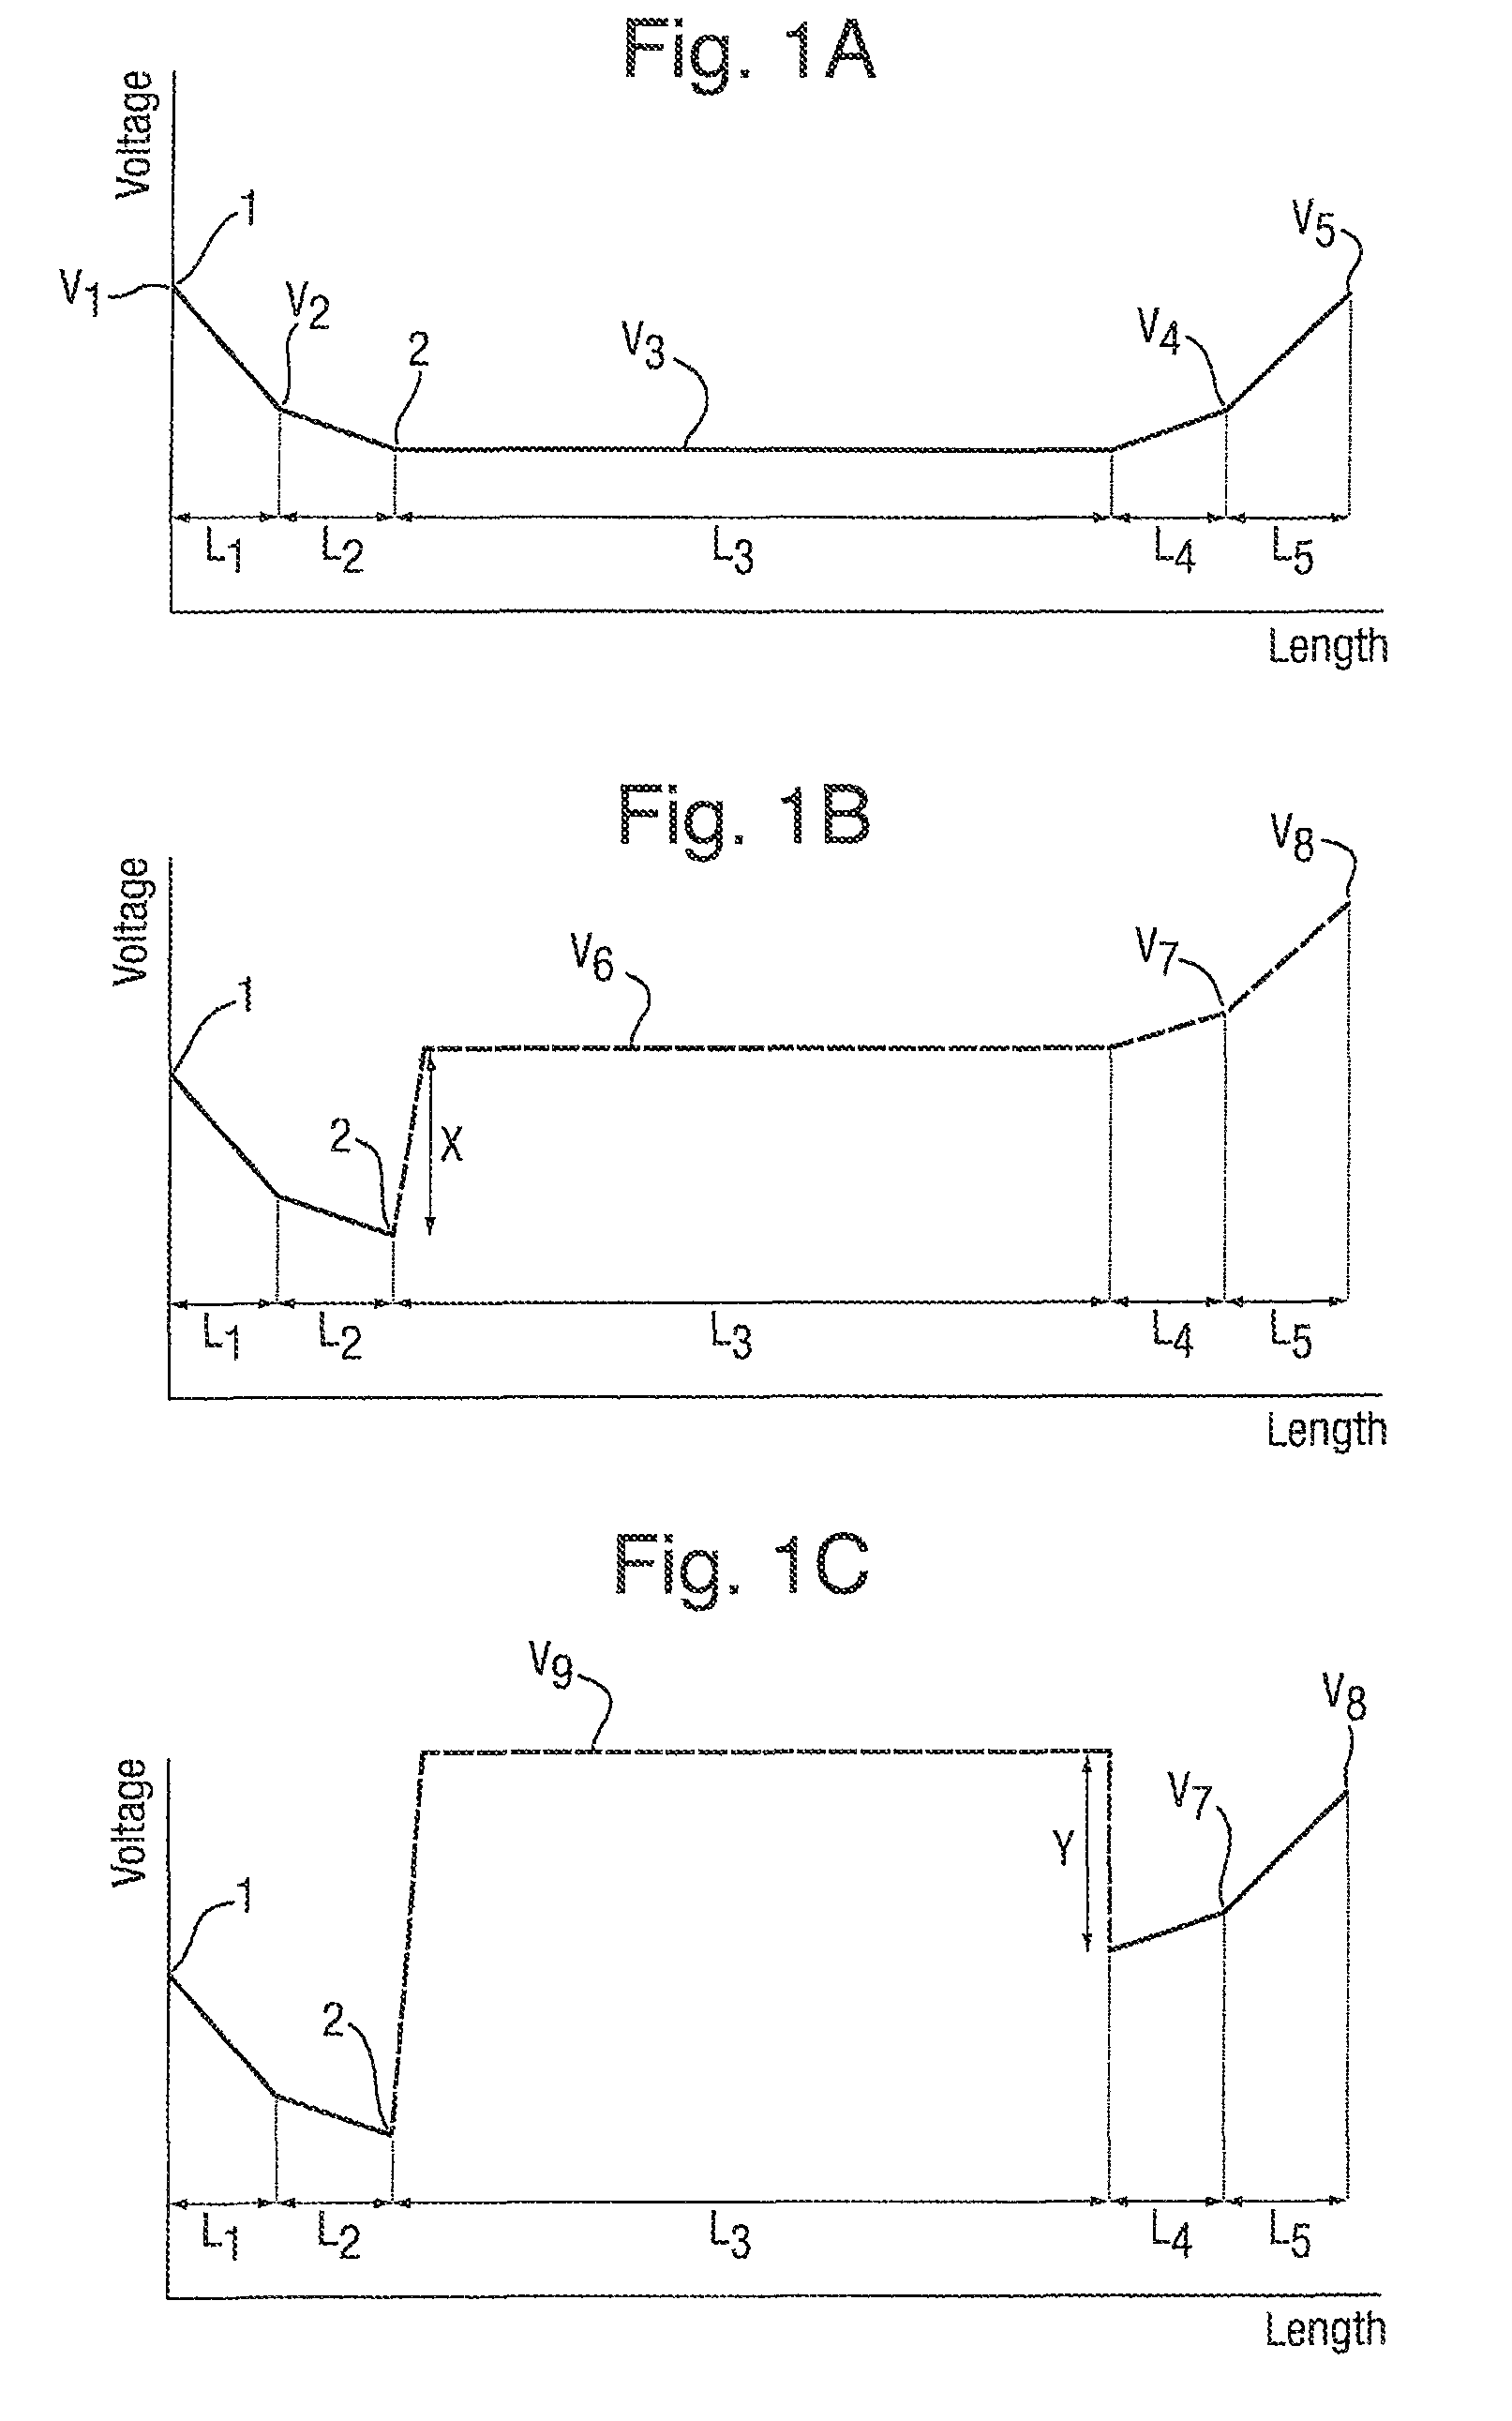 Mass spectrometers comprising accelerator devices